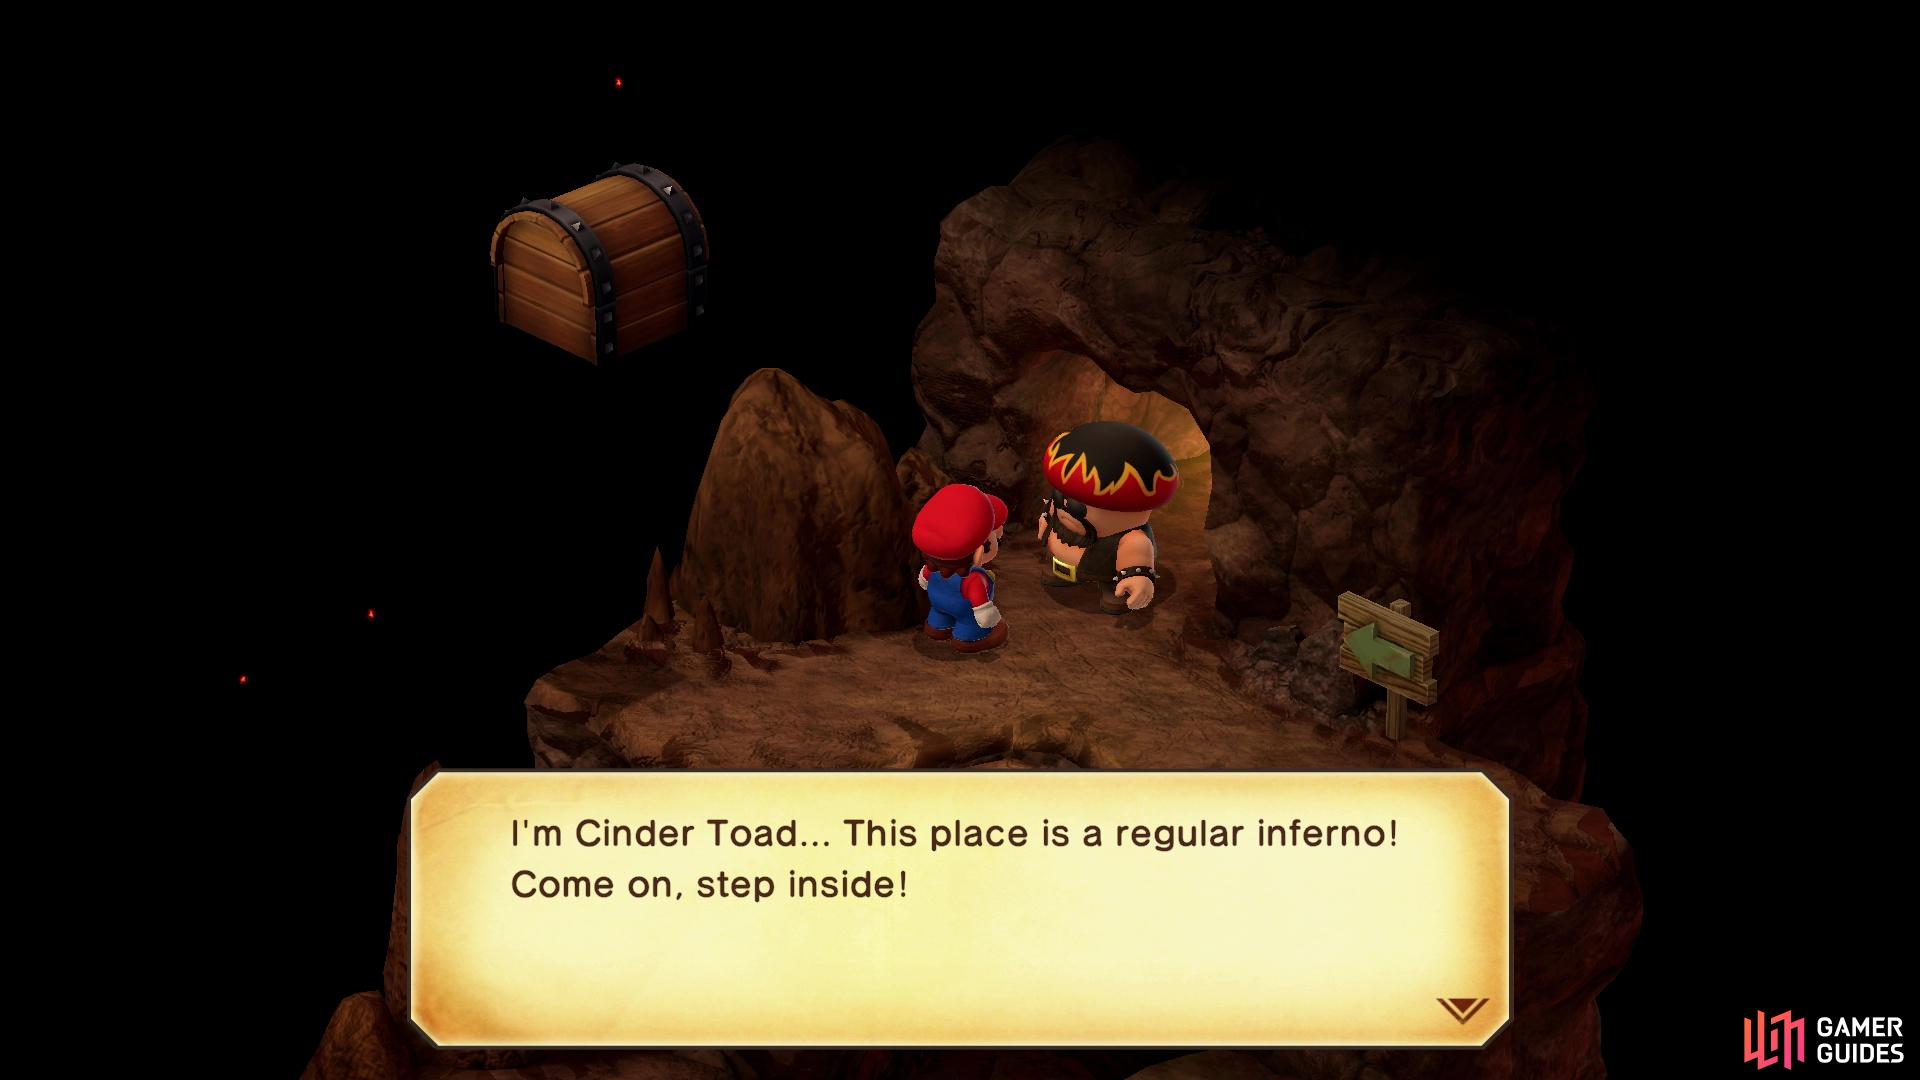 en route to meeting a rather rad toad - Cinder Toad.